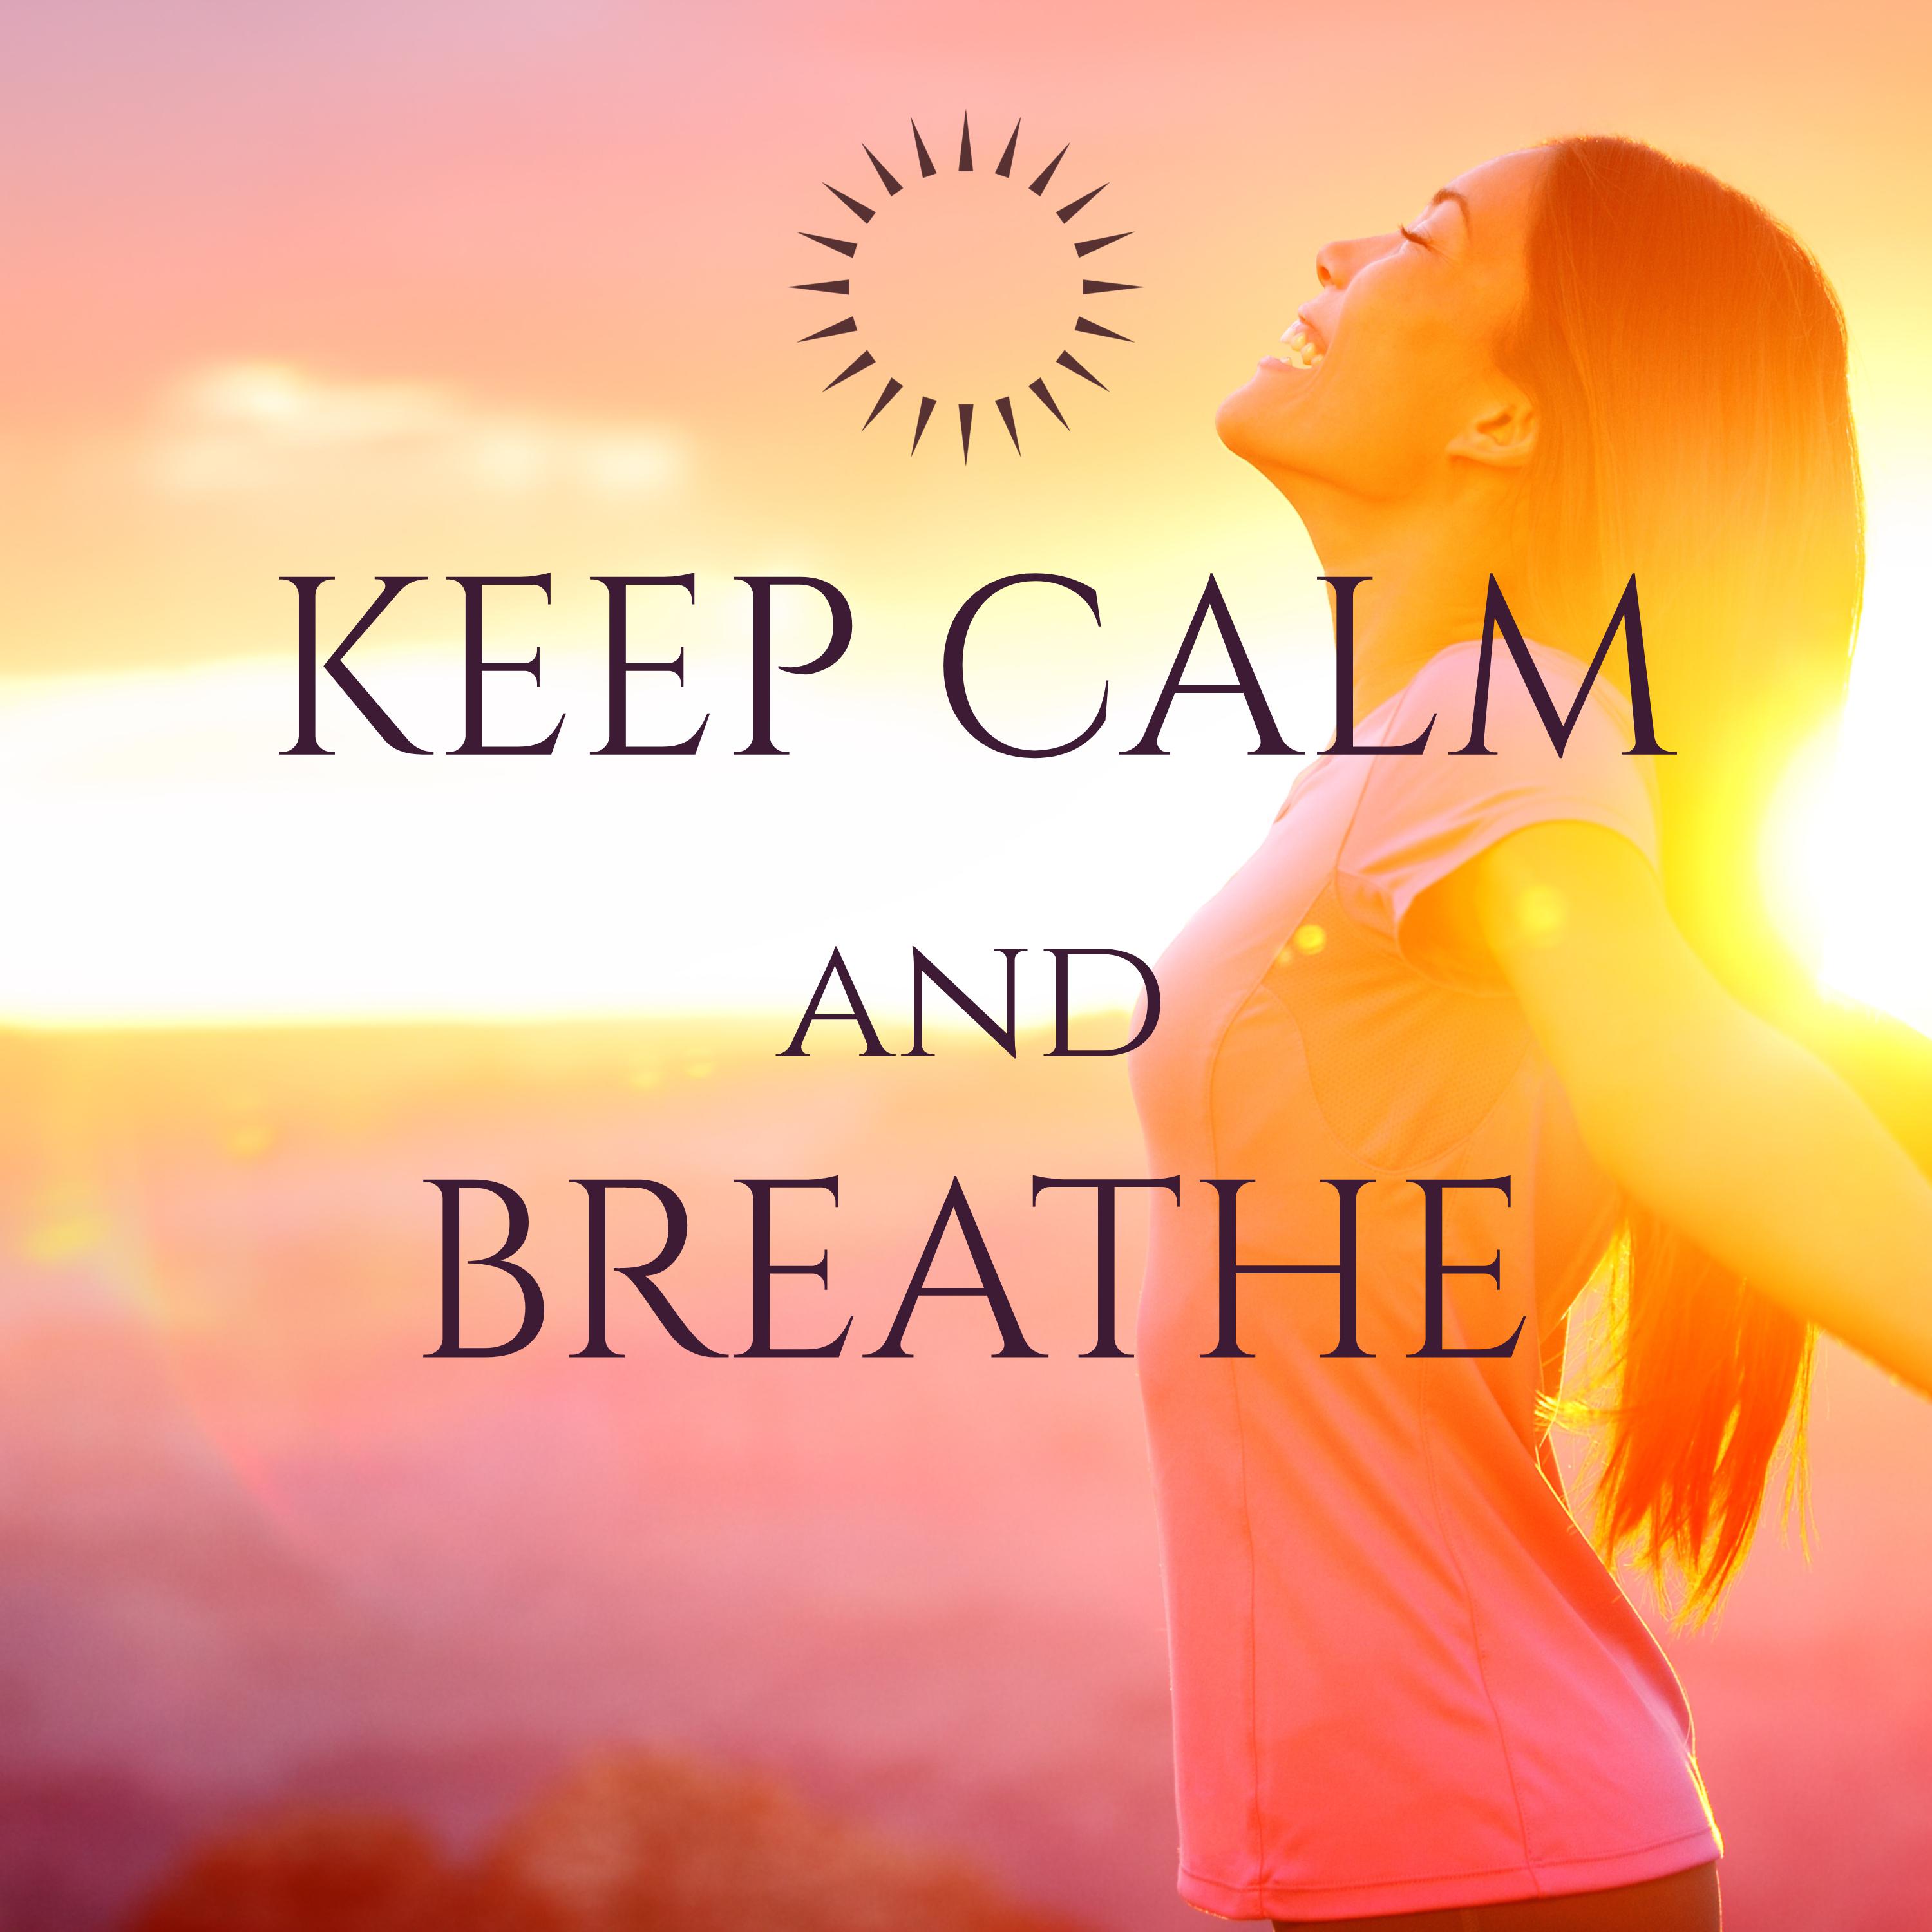 Keep Calm and Breathe  Soft Morning Chill Music to Wake Up  Smile